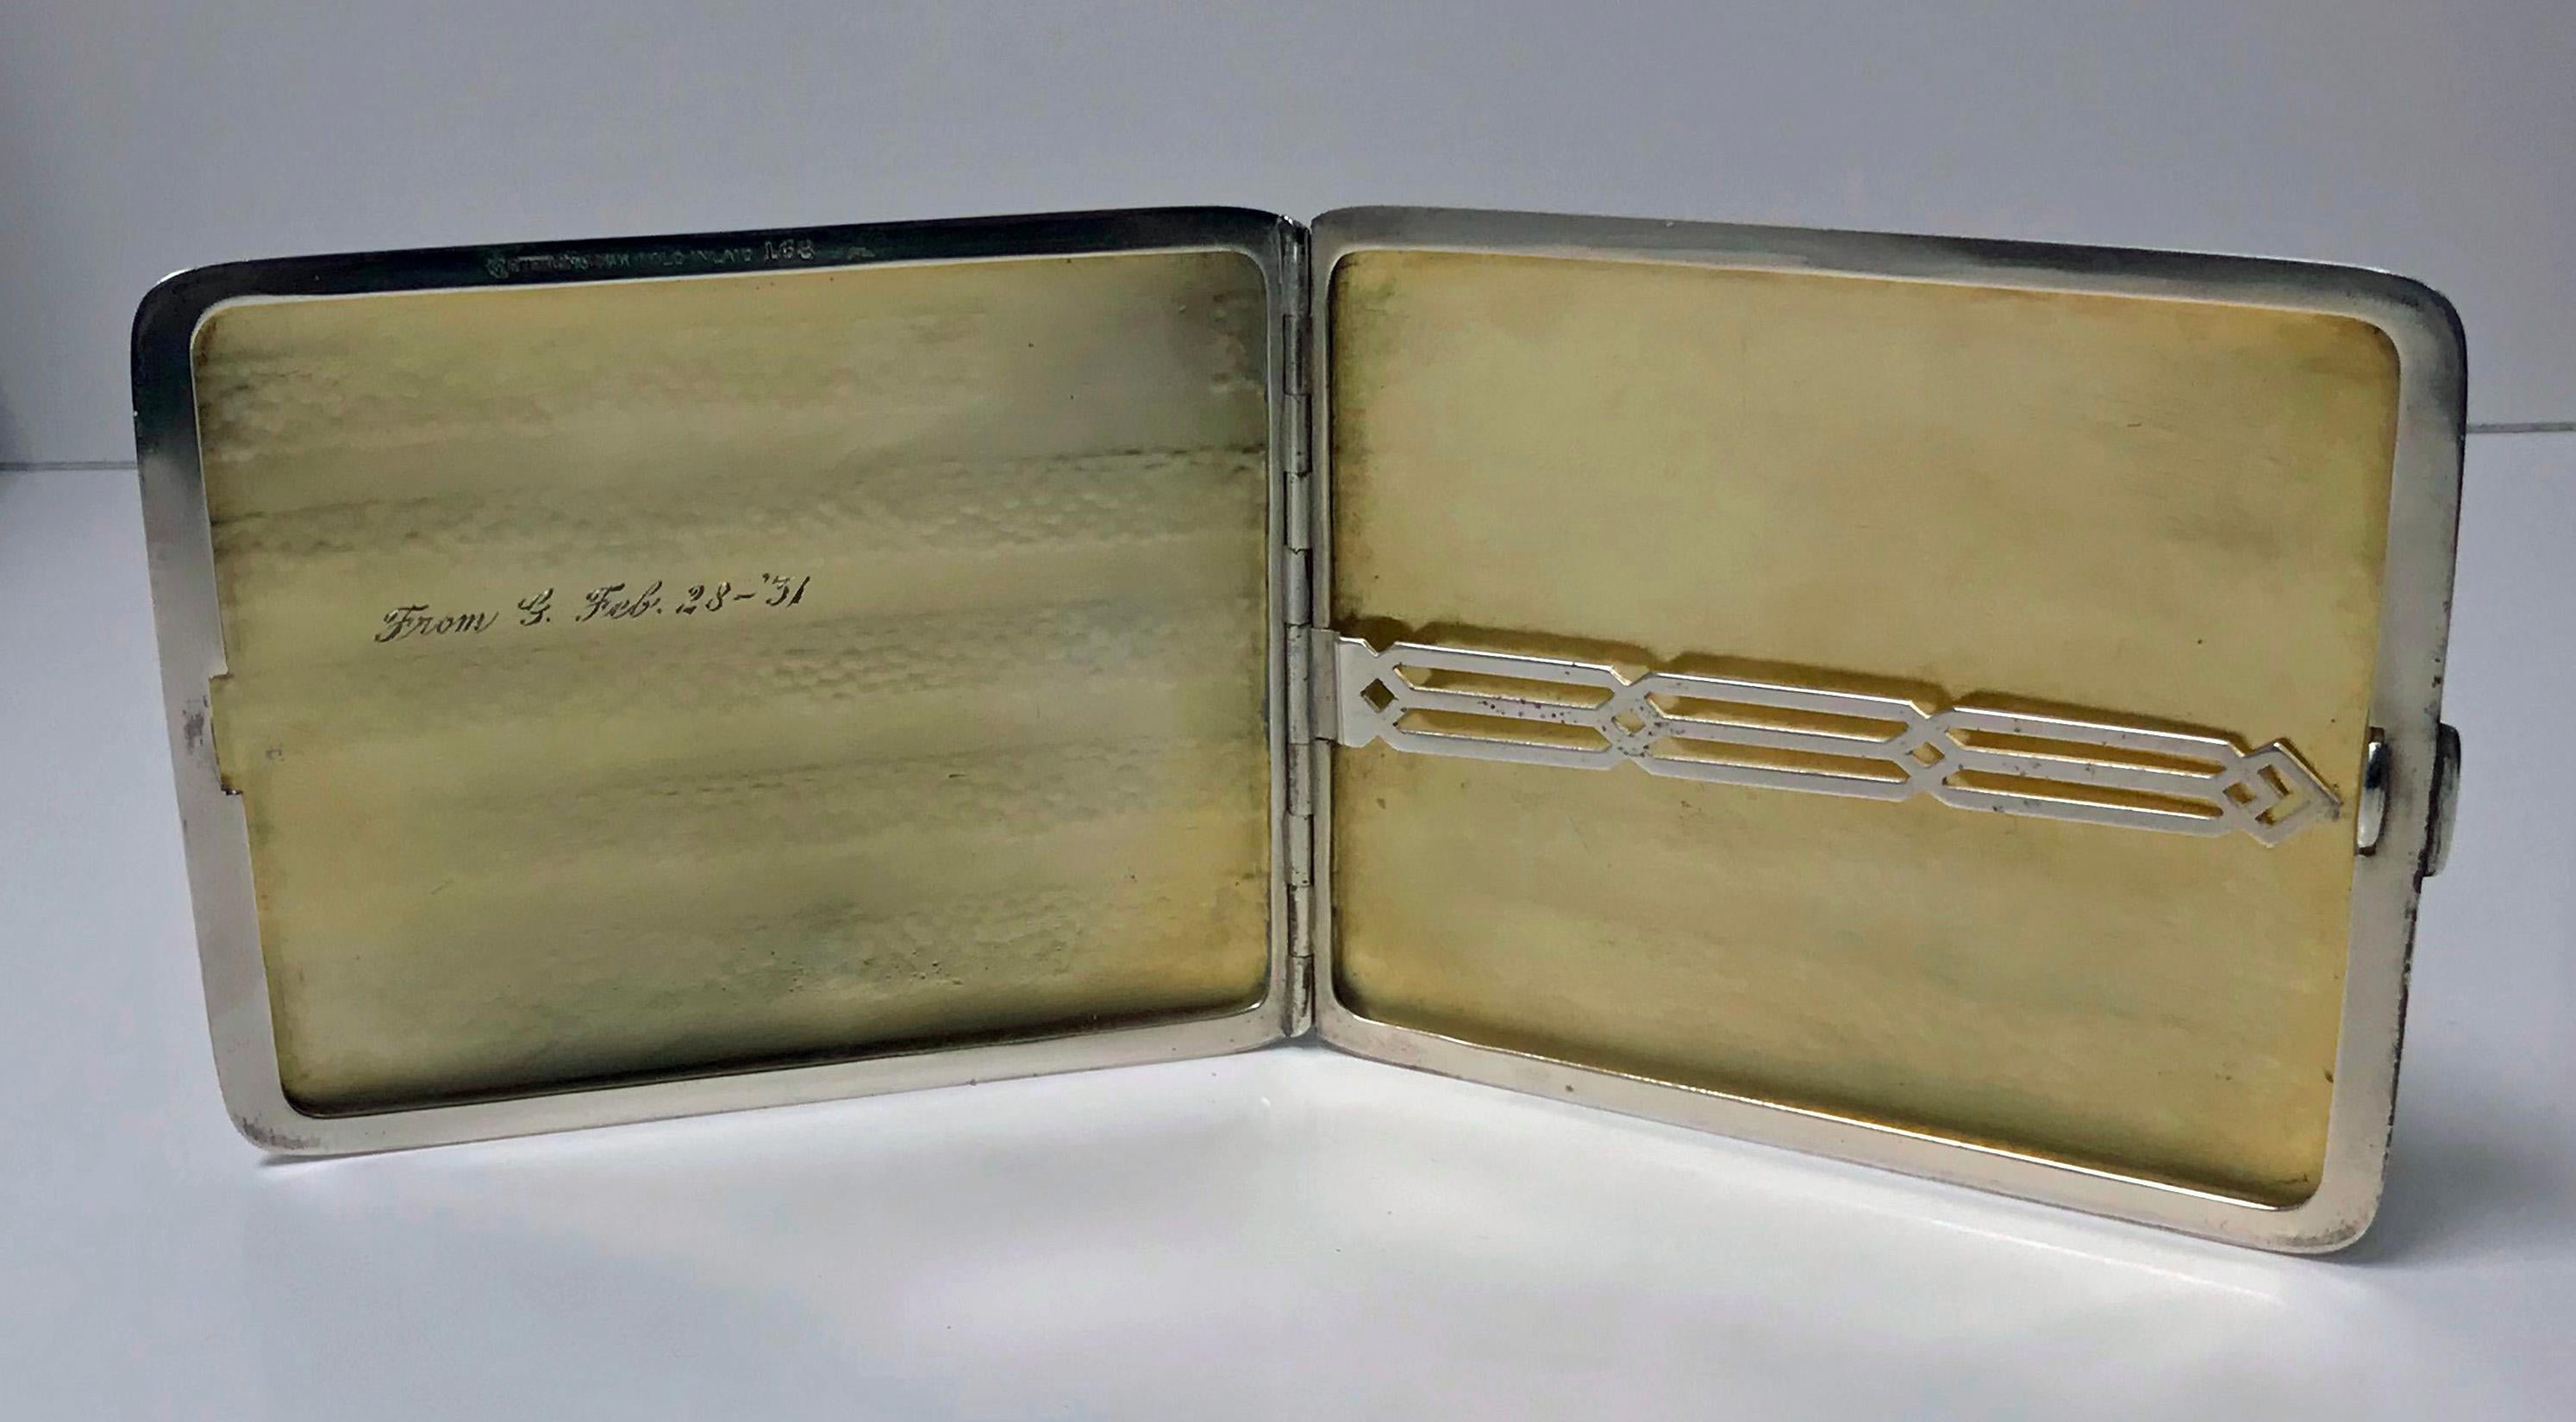 American Art Deco 14K and Sterling Silver Cigarette Case, Watrous Mfg Silver Co mark for CW Wallingford, CT and numbered 168. Rectangular slightly concave form hammered panels of sterling interspace with 14K pink gold inlaid bands. Interior gilded